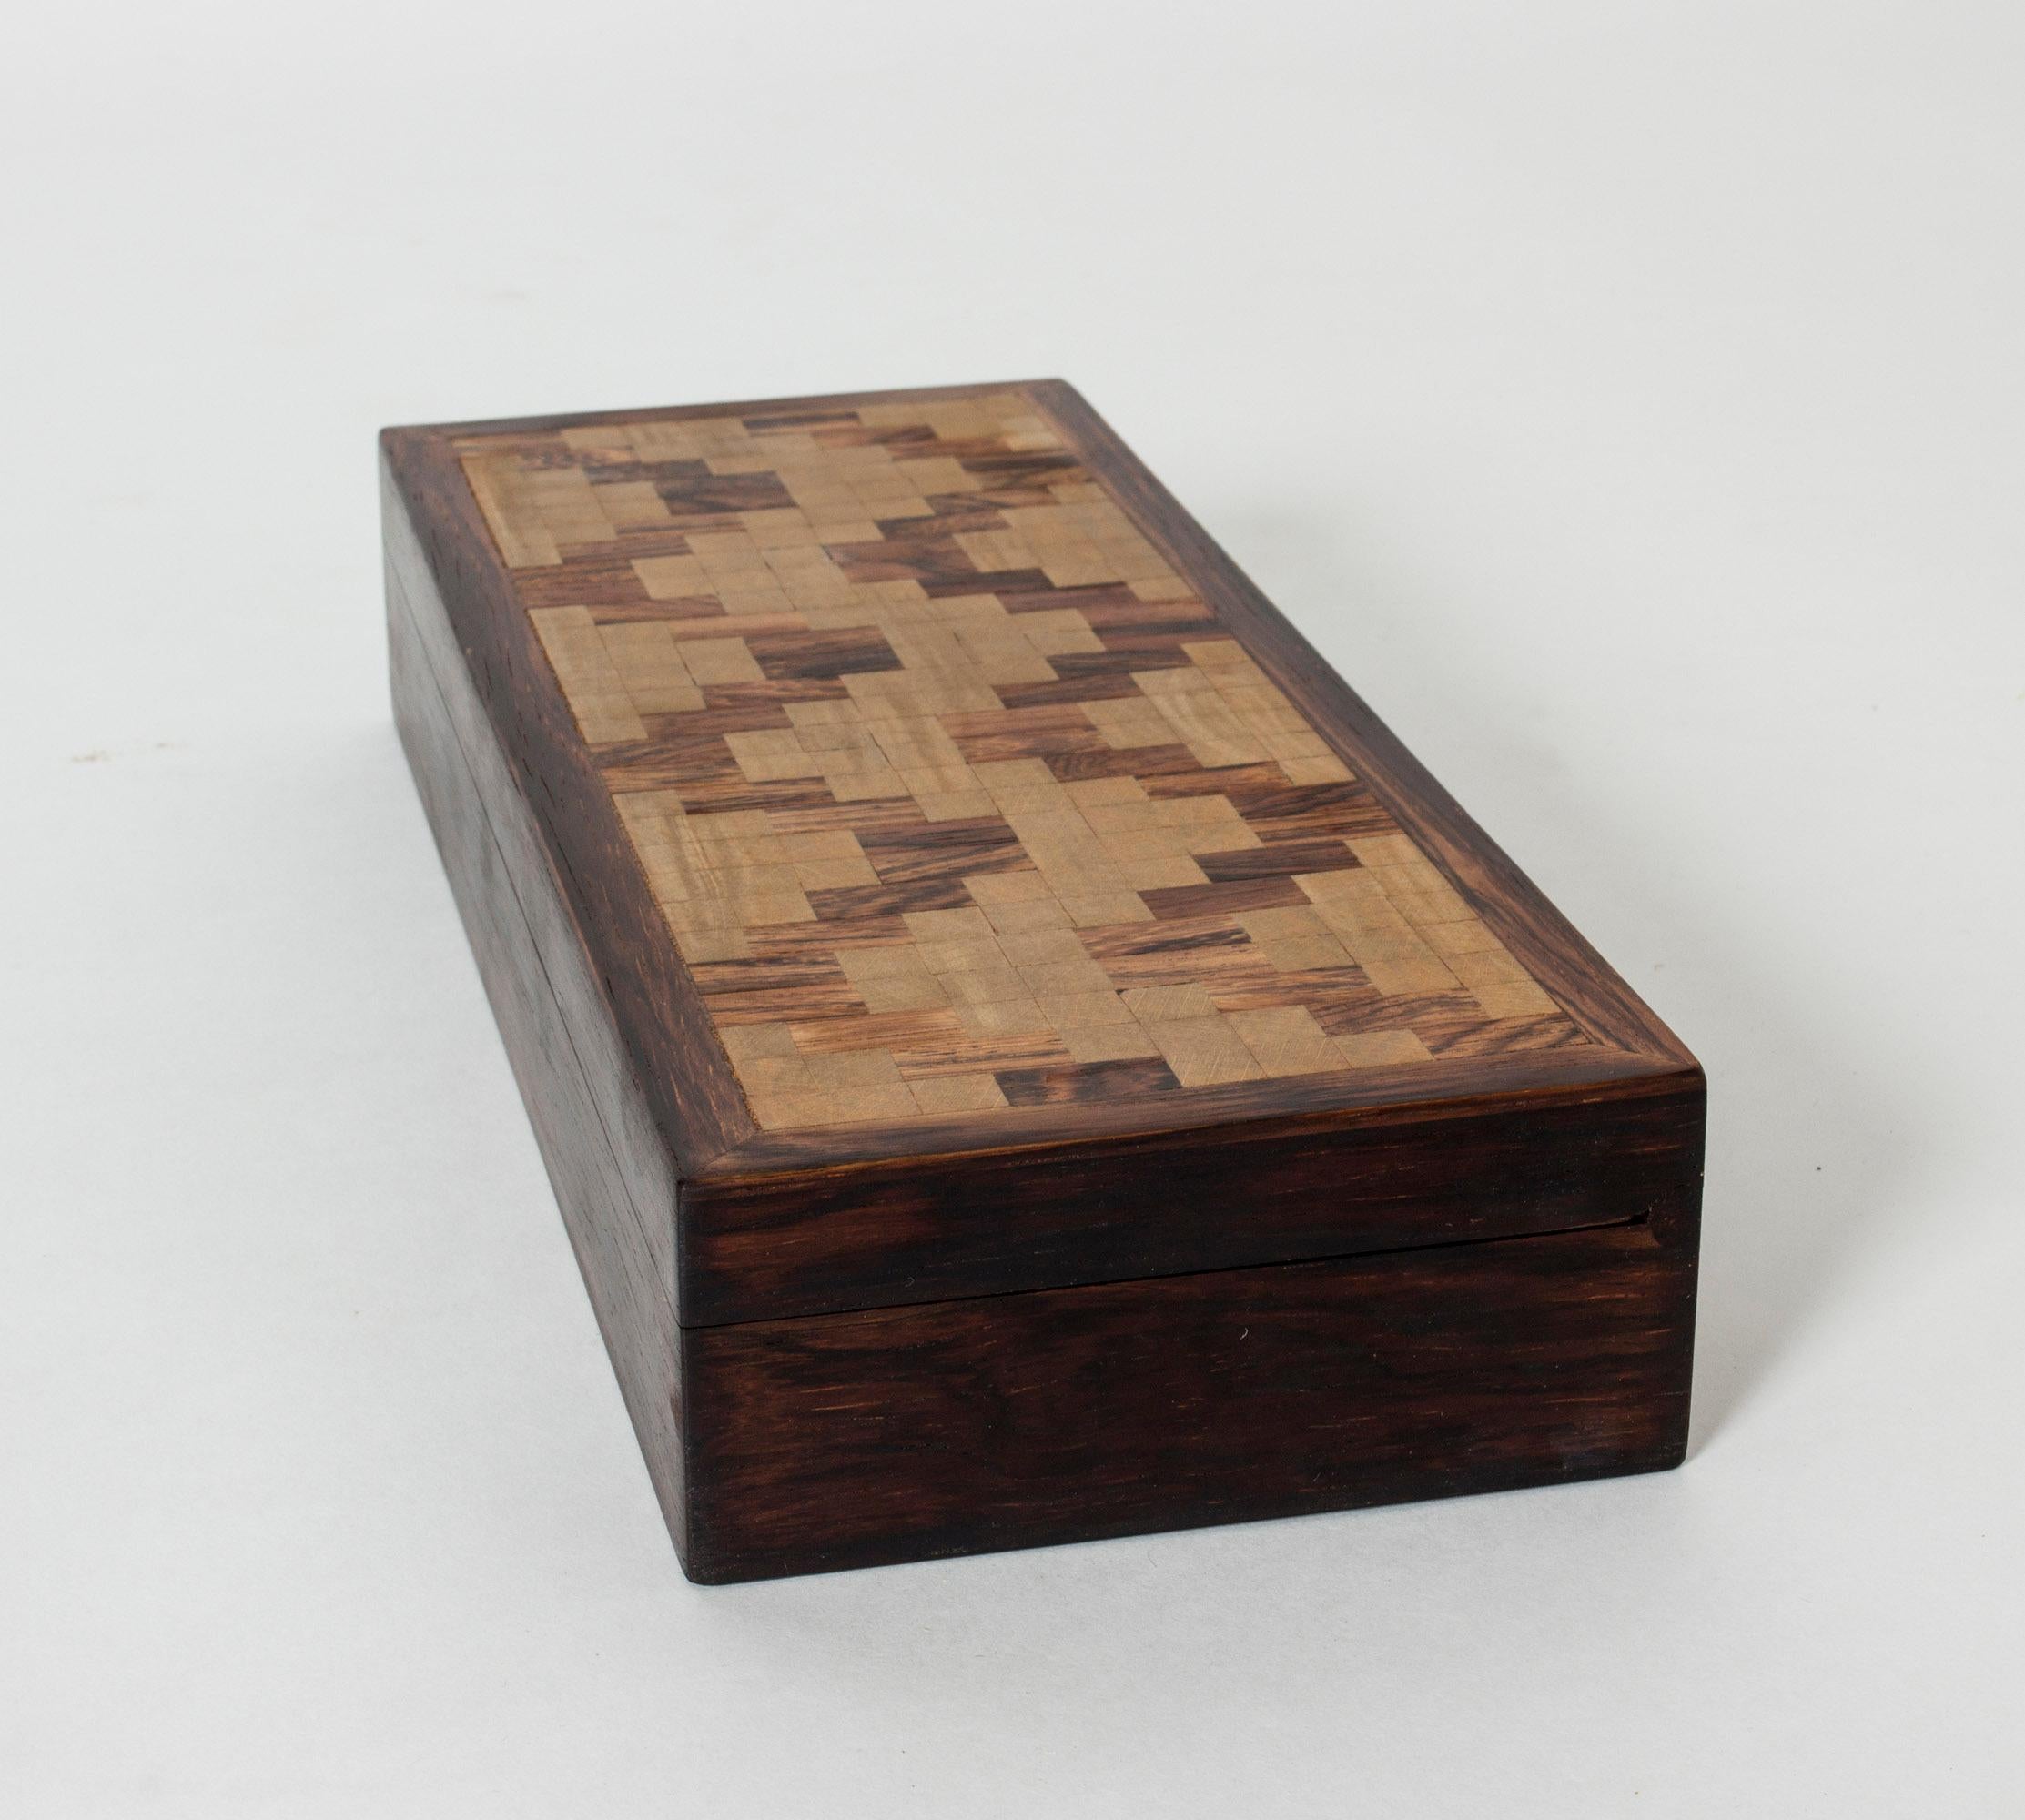 Rosewood case by Alfred Klitgaard, in a sleek design with an amazing graphic pattern of different color wood on the lid.